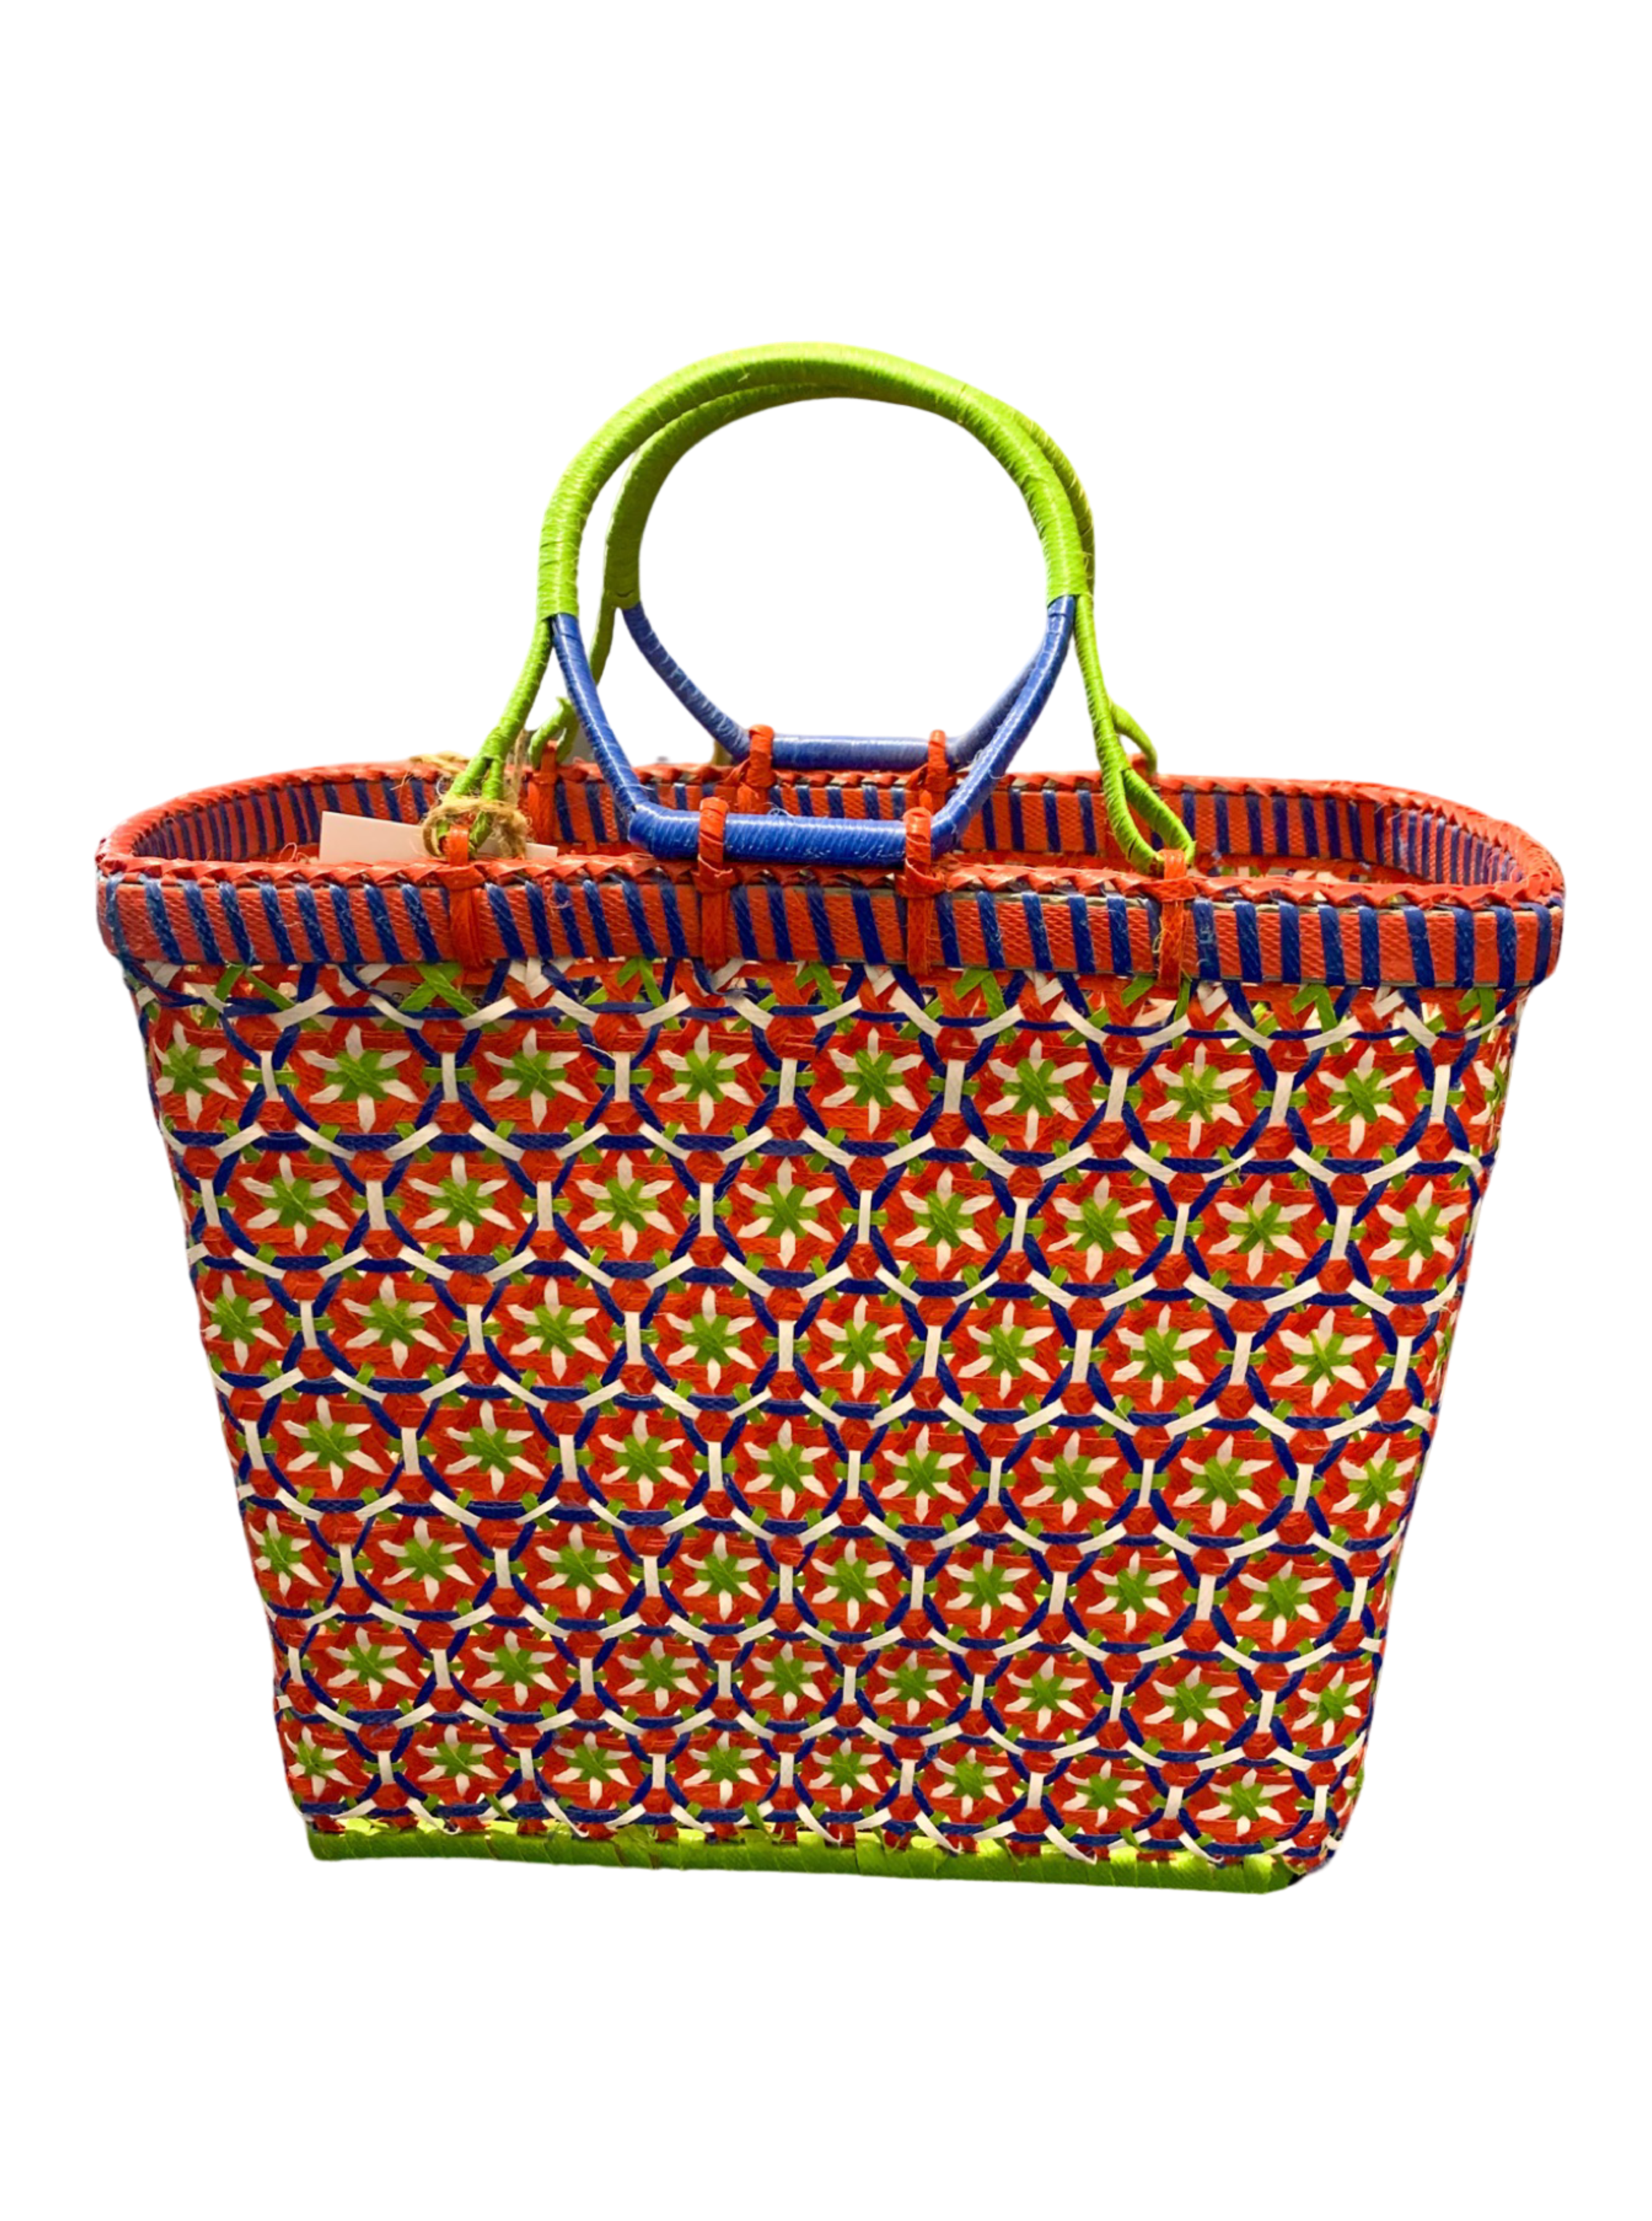 Shopping bag, beach bag, recycled plastic basket for the market by